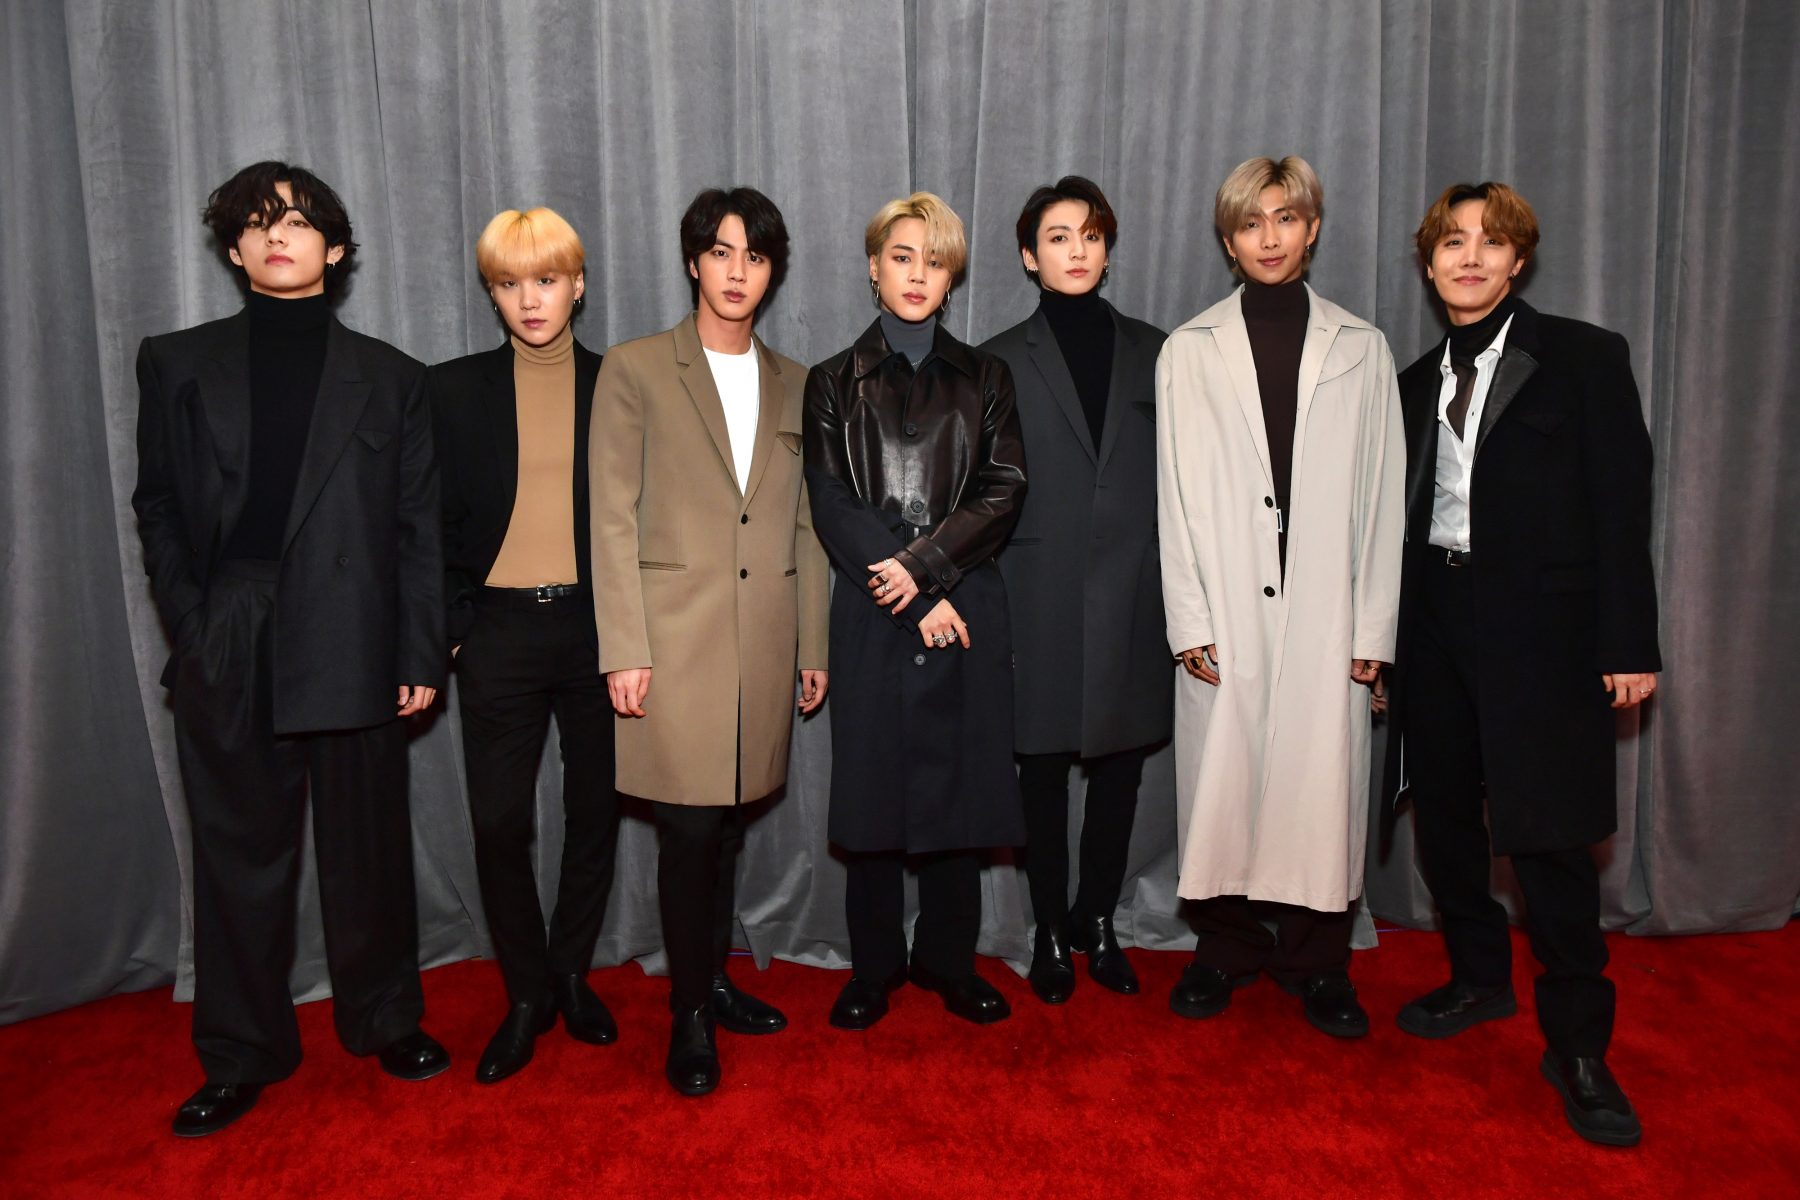 Why is Louis Vuitton partnering with Kim Taehyung and BTS? - Quora